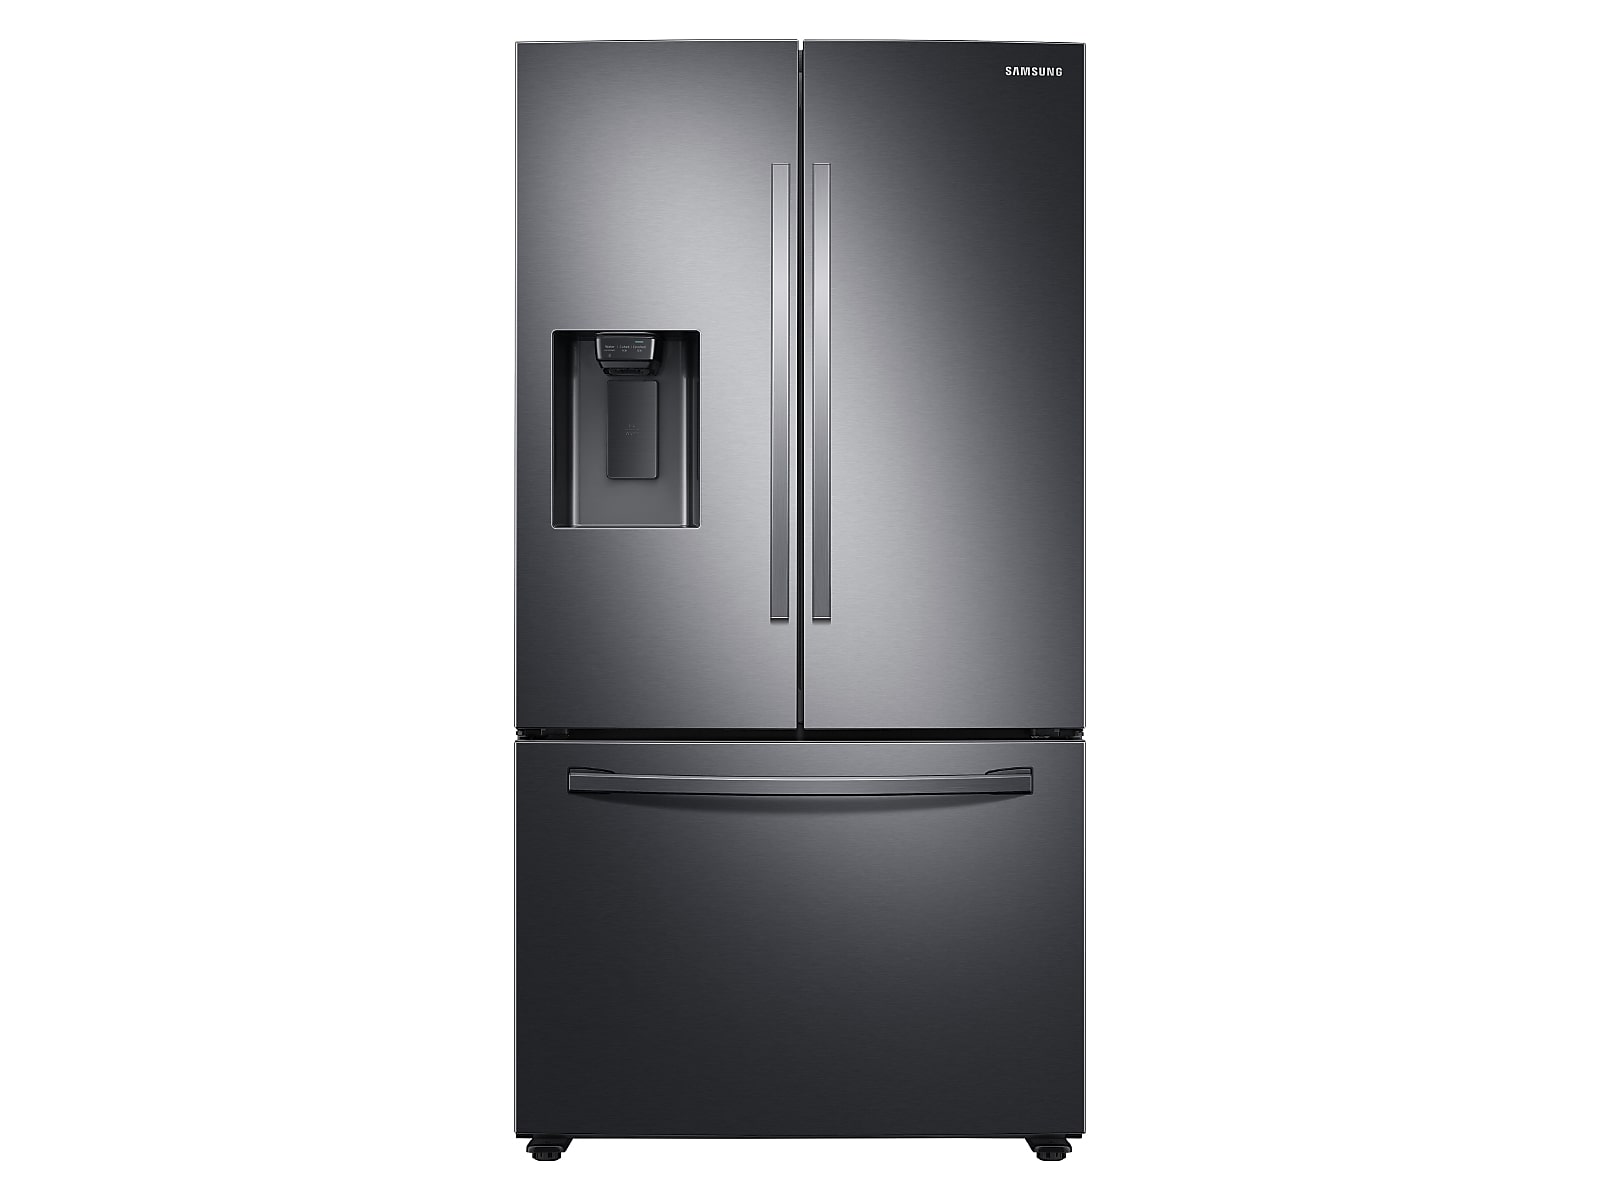 Samsung 27 cu. ft. Large Capacity 3-Door French Door Refrigerator with External Water & Ice Dispenser in Black Stainless Steel(RF27T5201SG/AA)